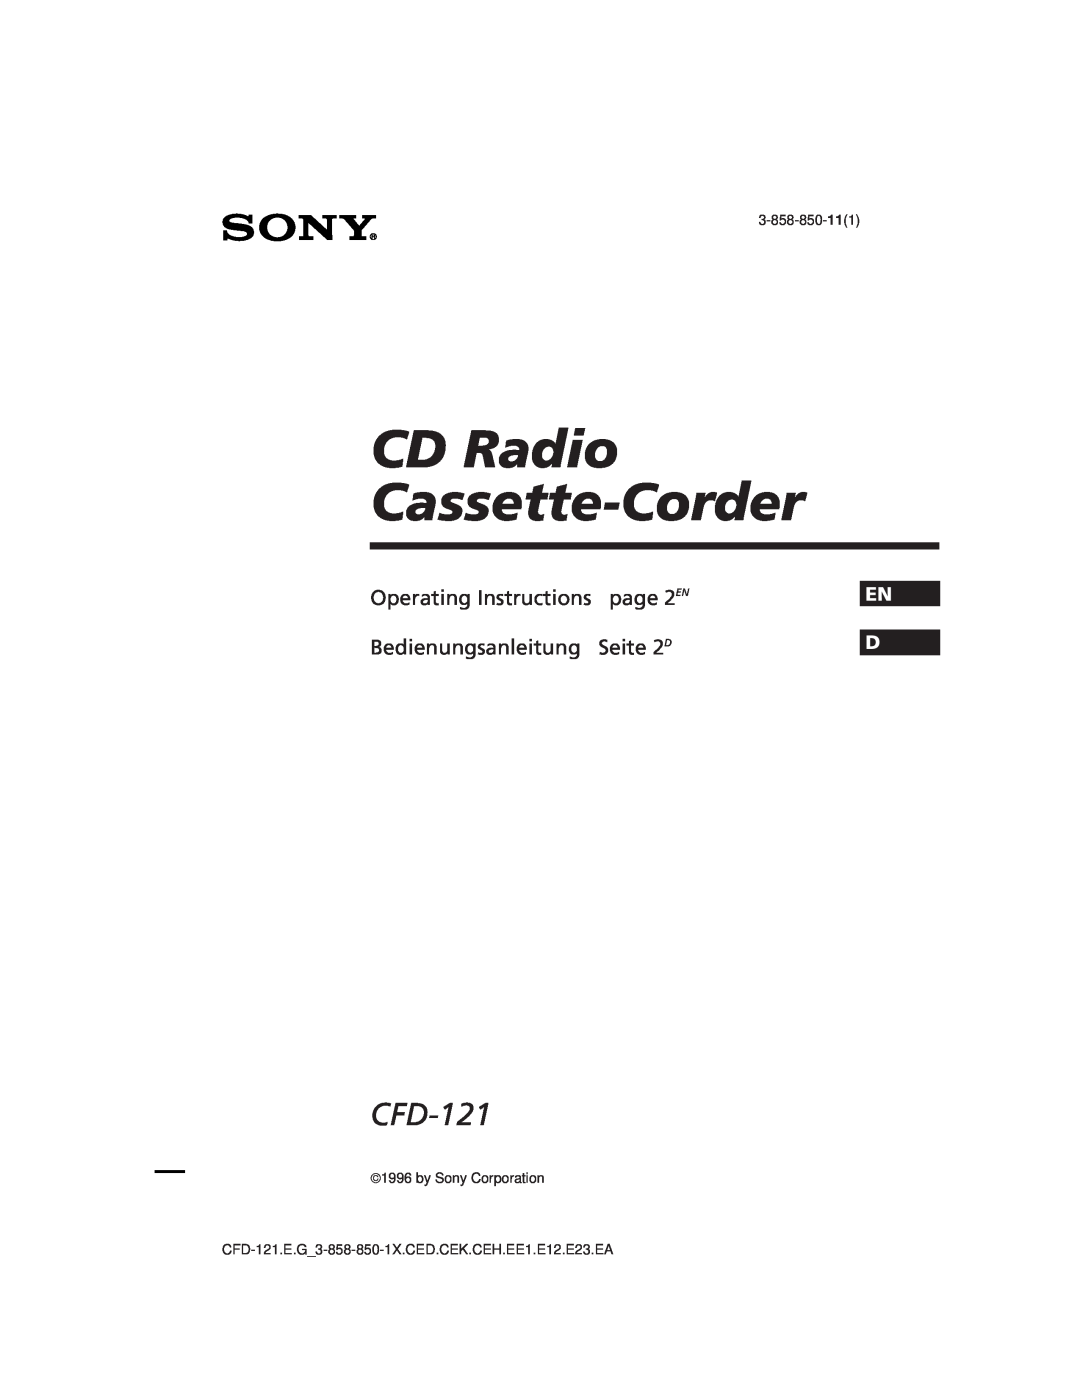 Sony CFD-121 operating instructions CD Radio Cassette-Corder, Operating Instructions, page 2EN, Bedienungsanleitung 